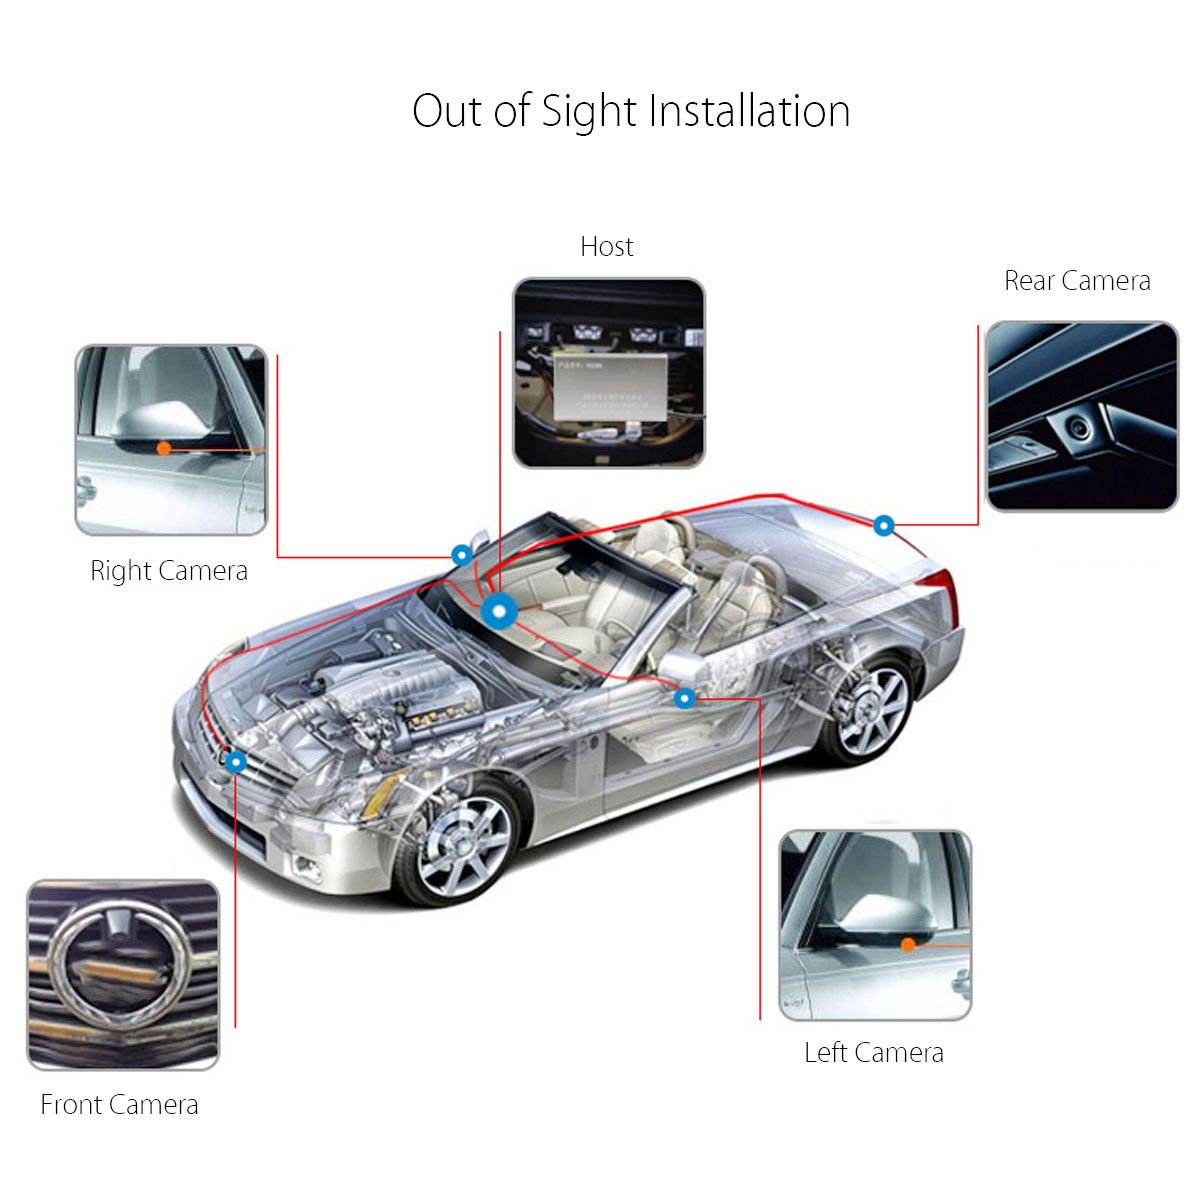 360-Degree-Bird-View-Panoramic-System-4-Camera-Car-DVR-Recording-Parking-Rear-View-1476313